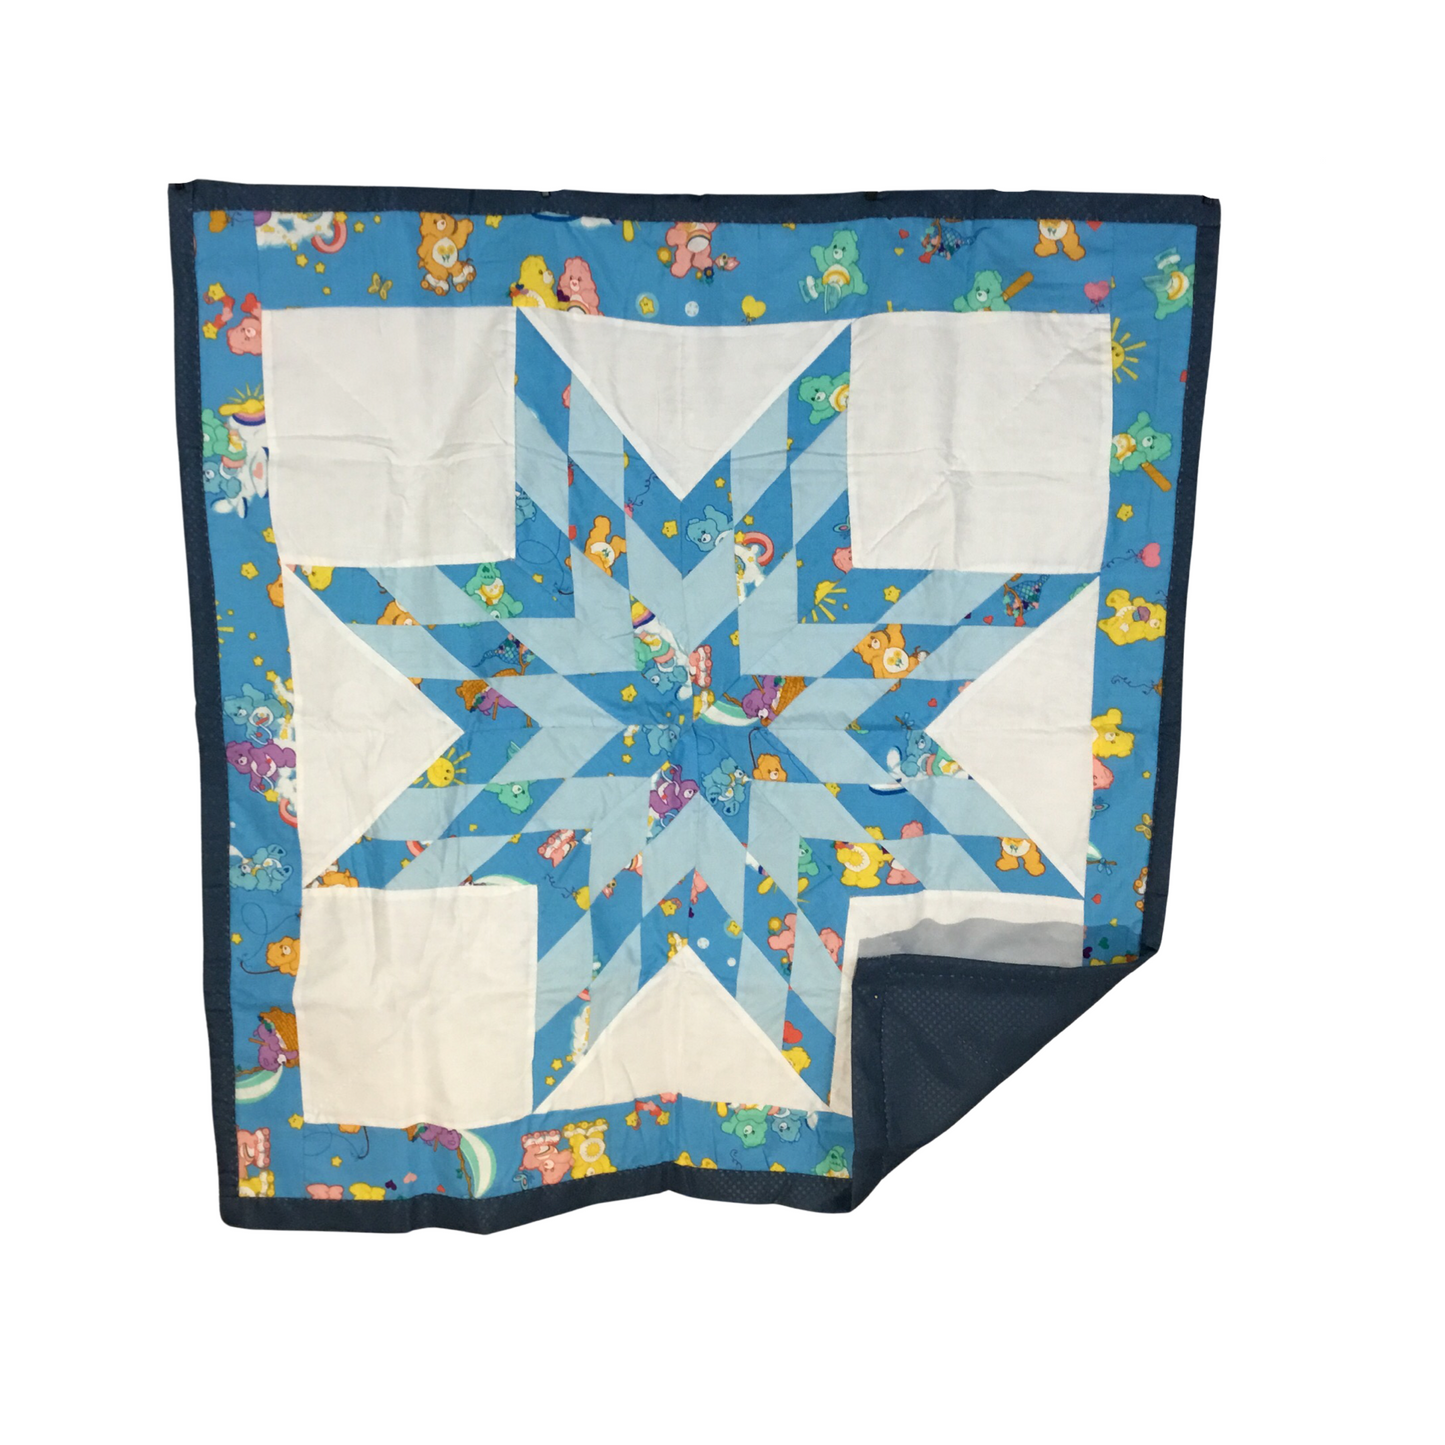 LZ Care Bears Baby Starquilt